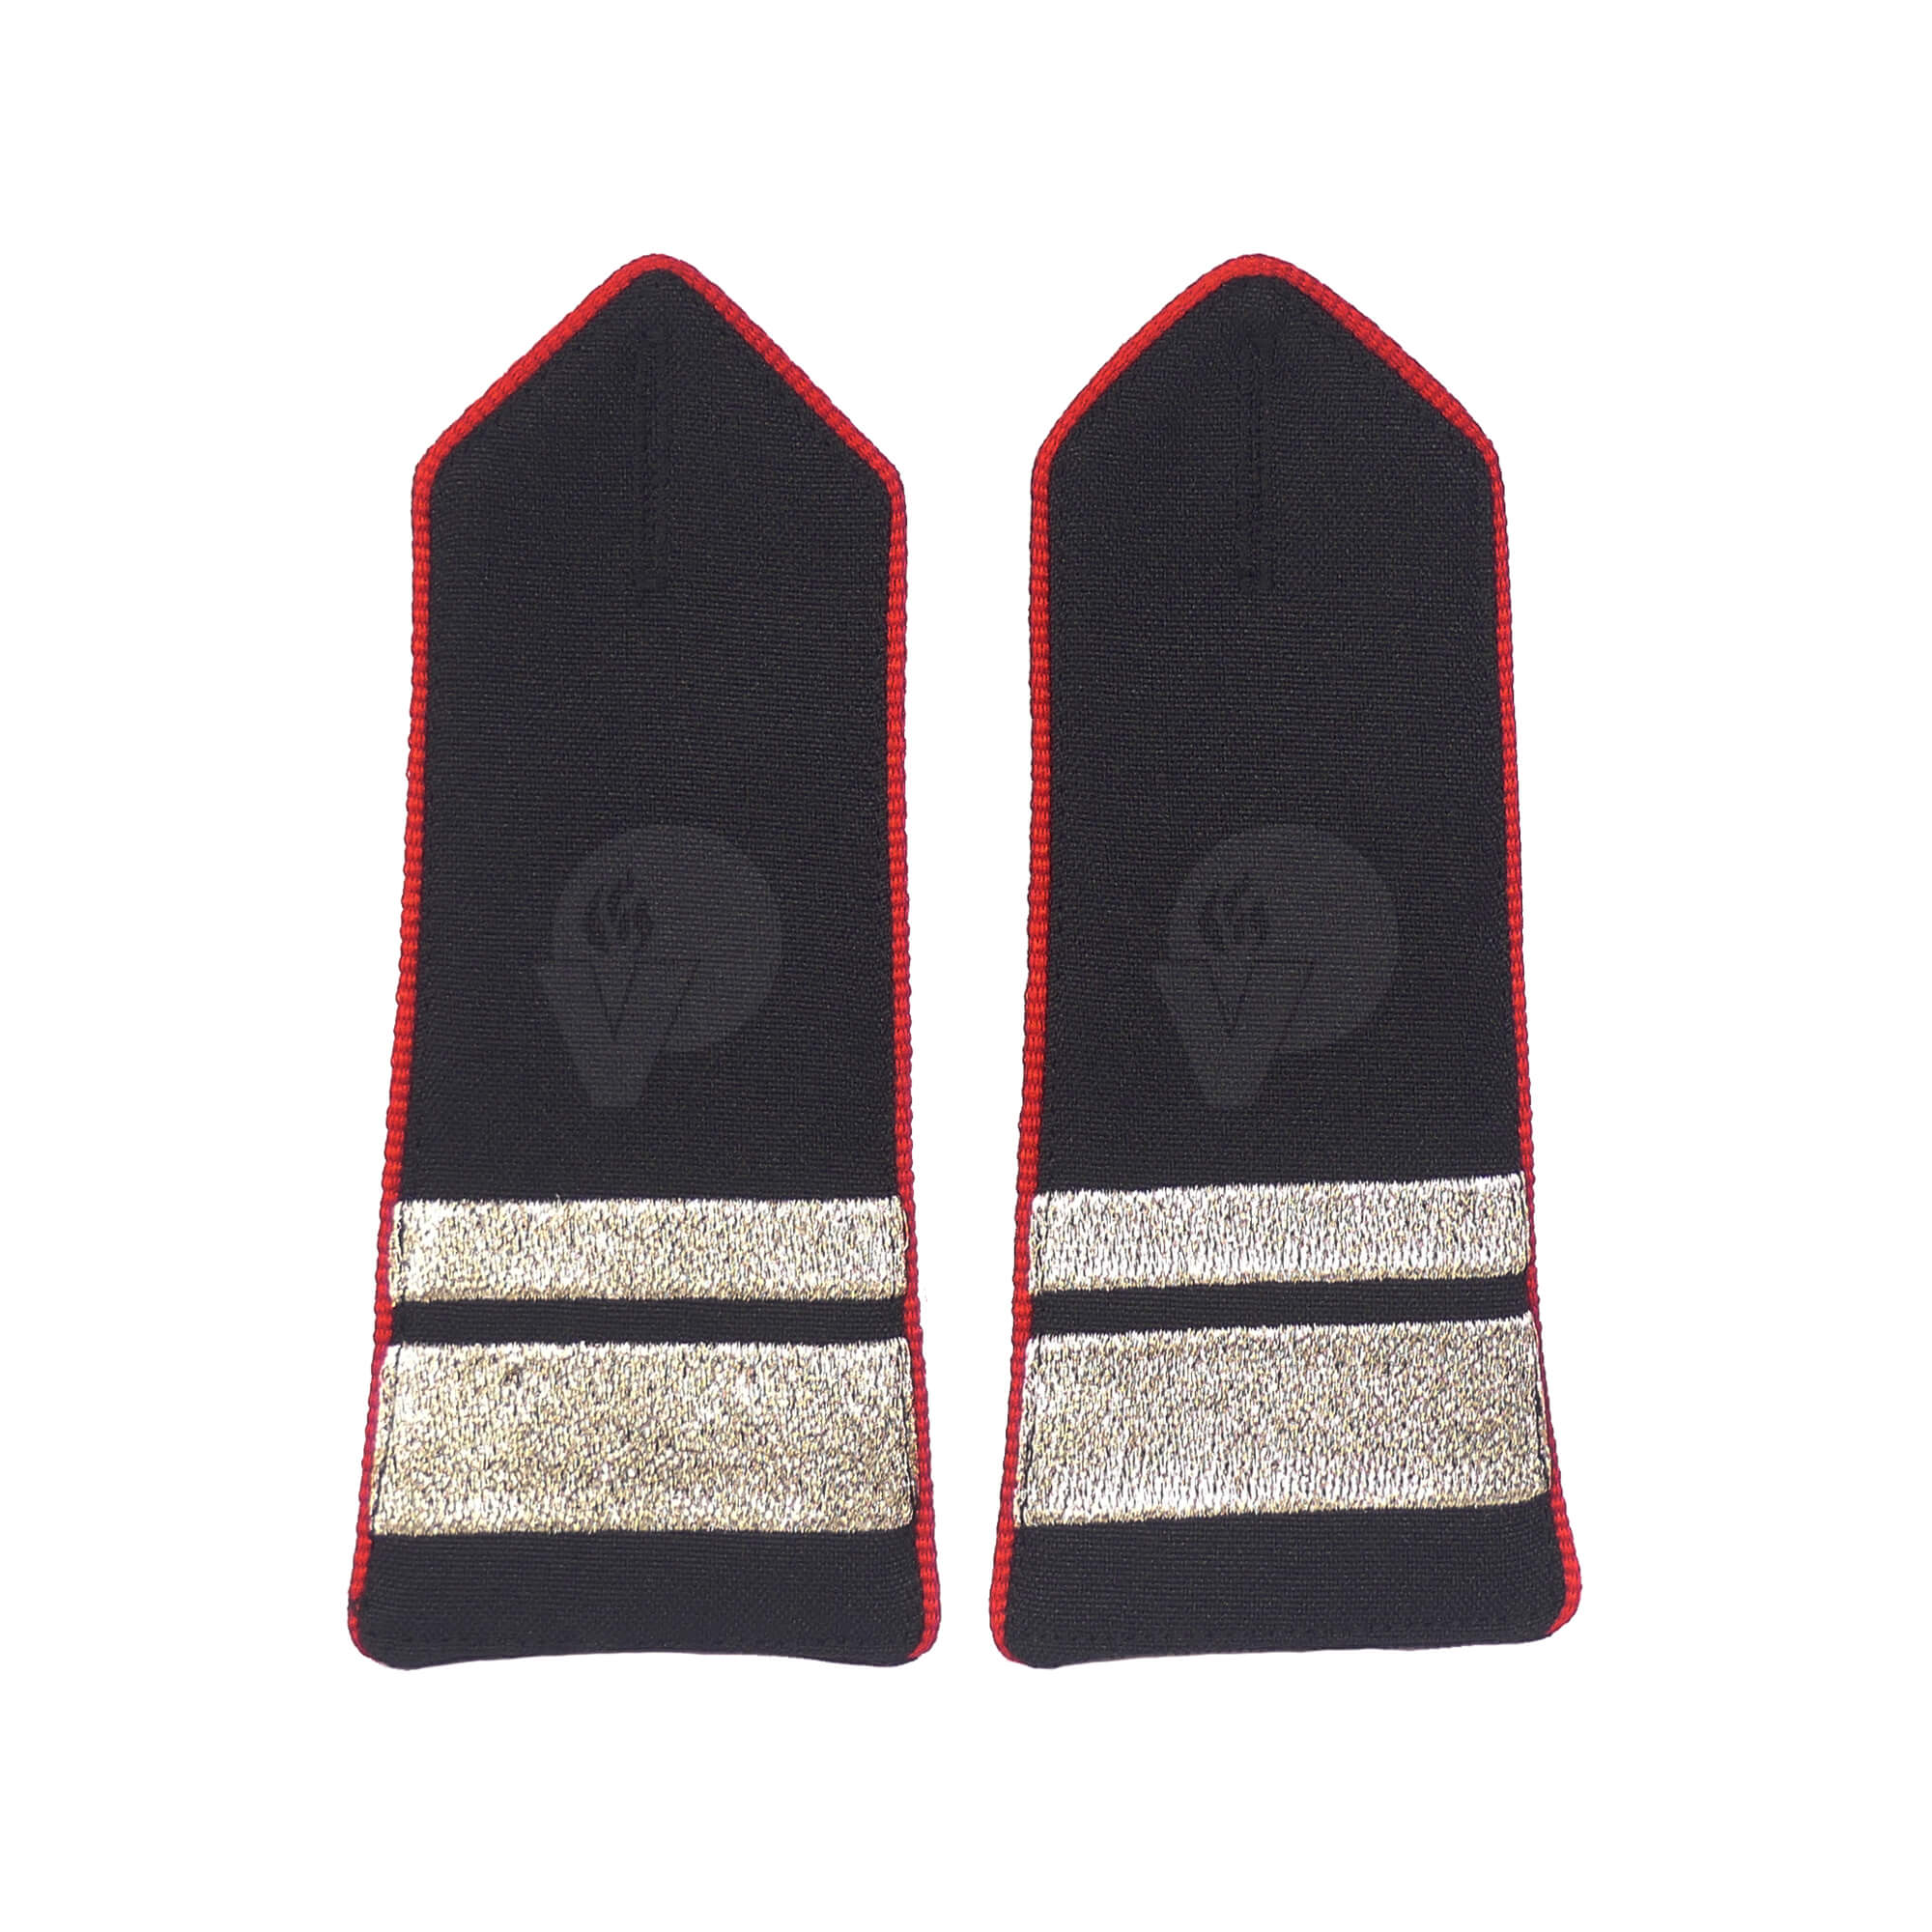 Rank Marks for Professional Firefighters, First Class Firefighter